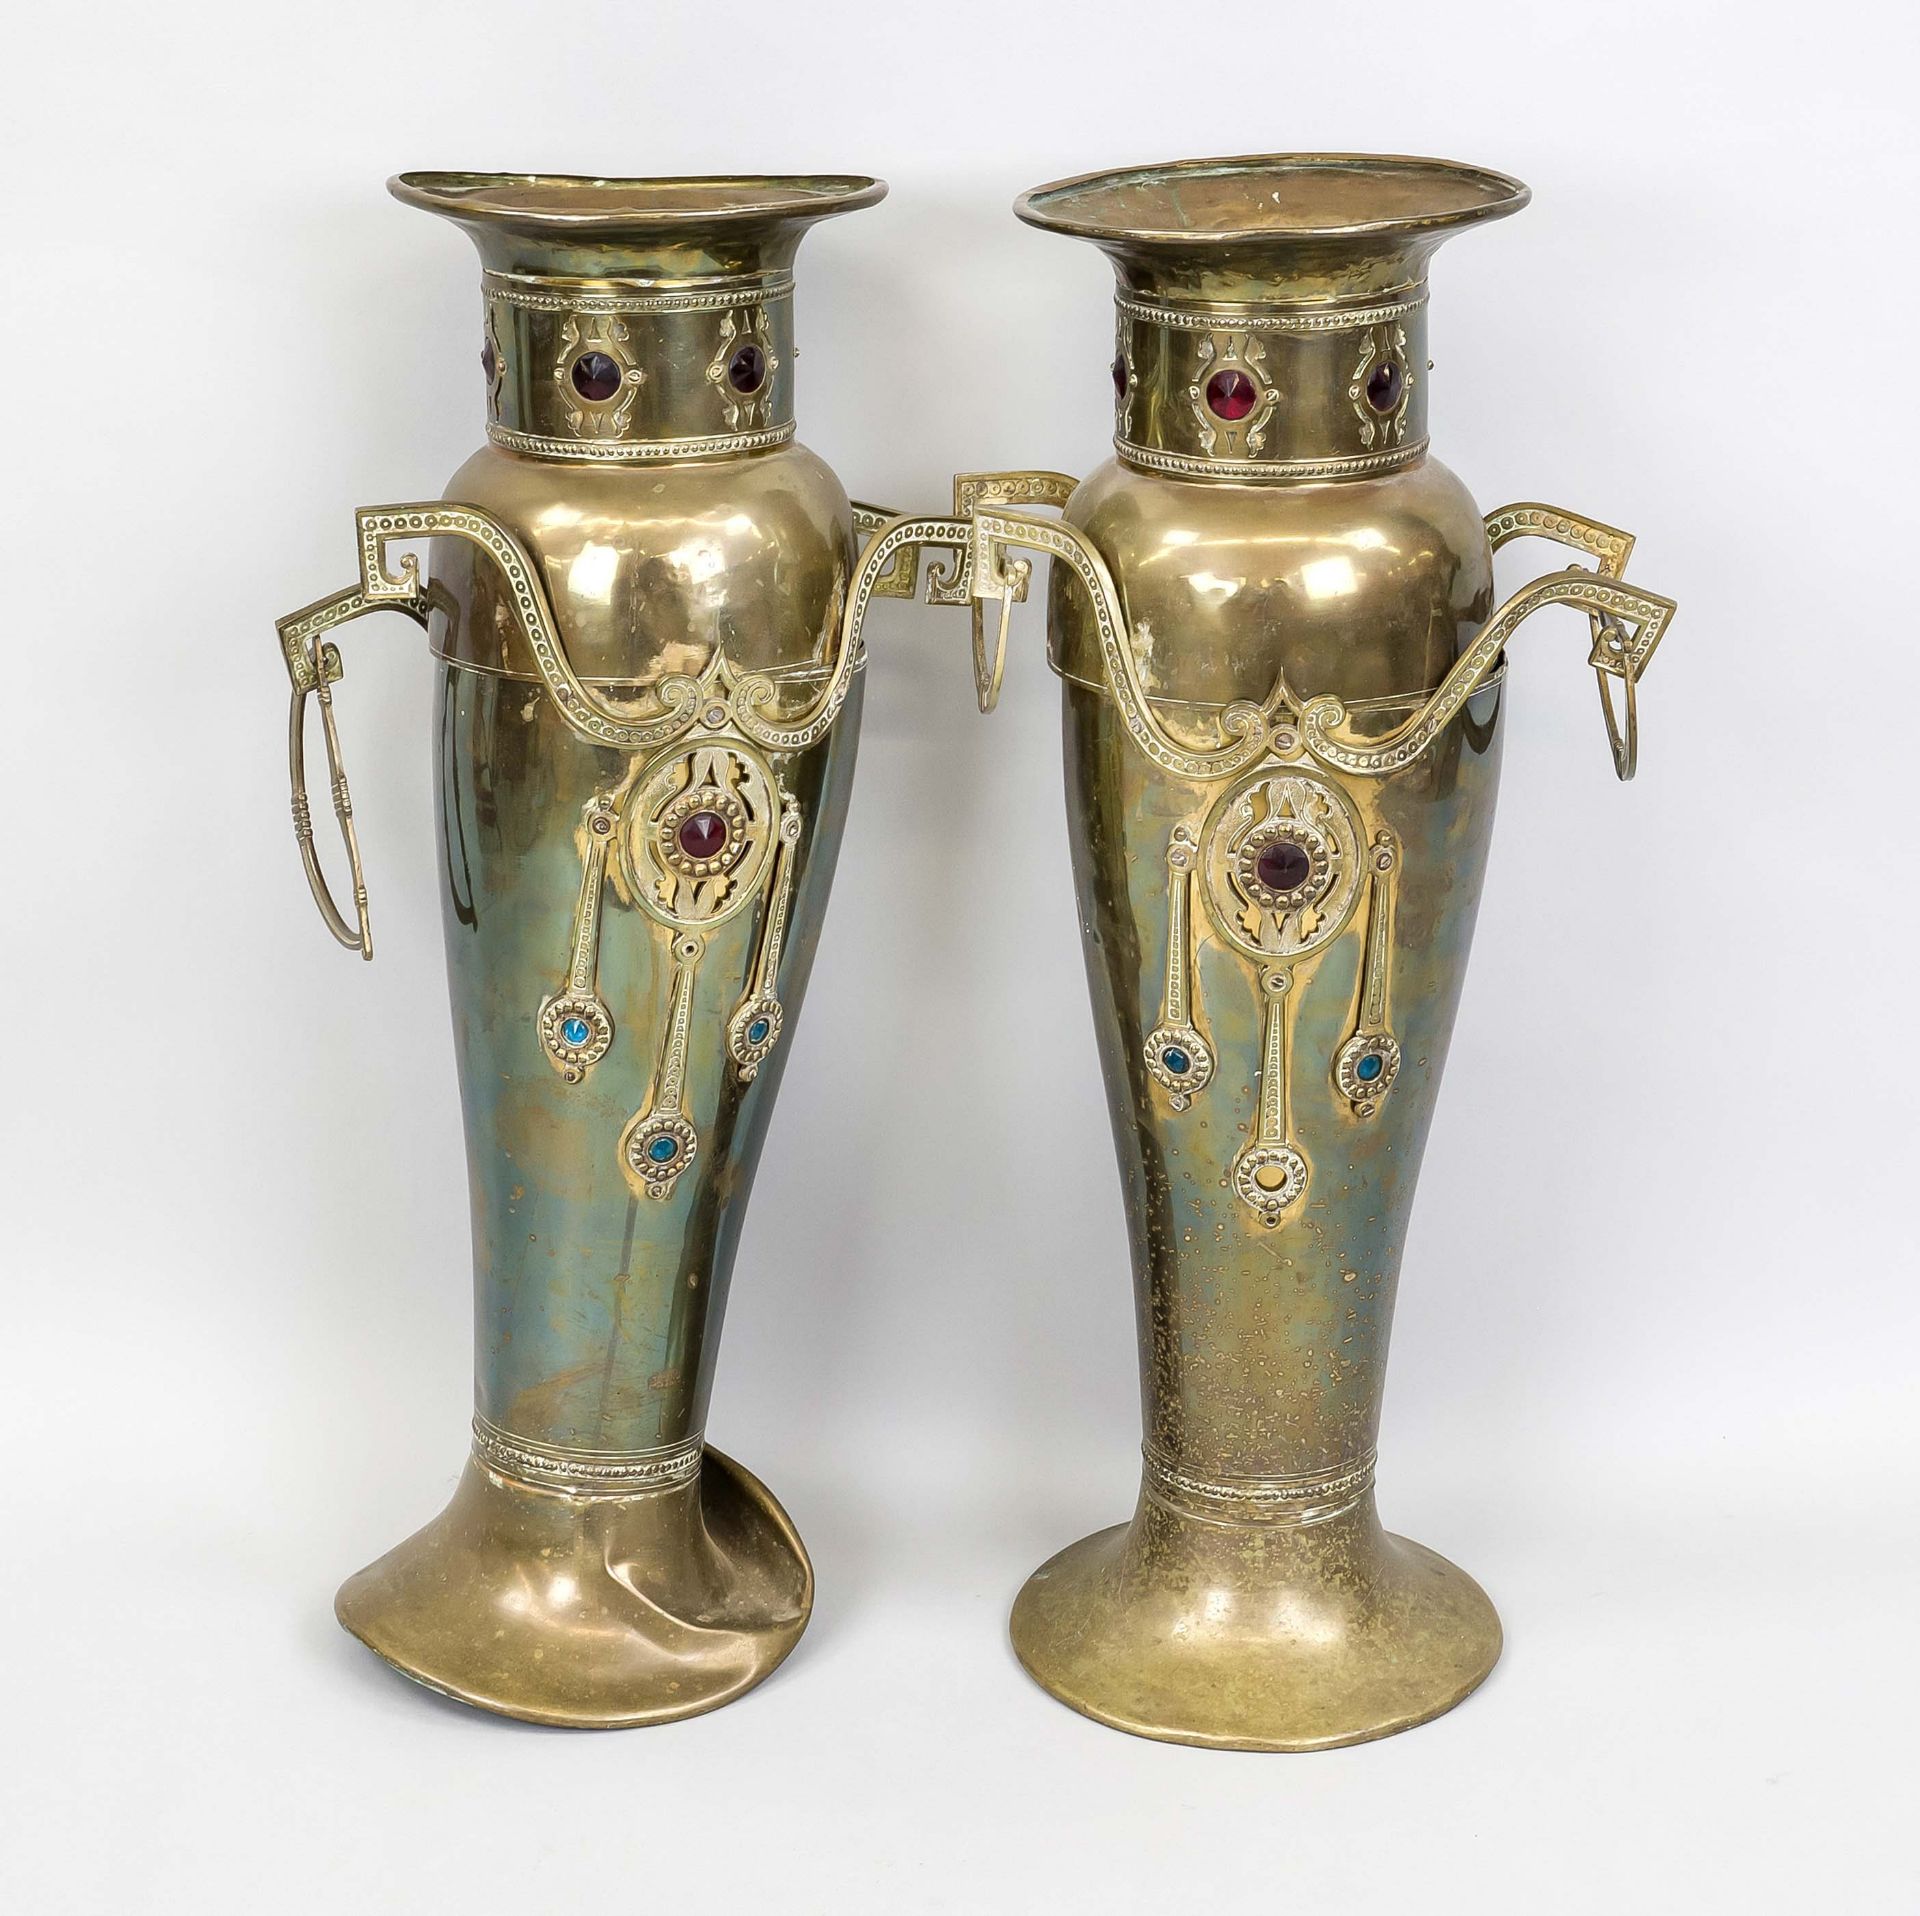 Pair of cachepo vases, late 19th century, brass and faceted glass stones, rubbed, bumped and dented,